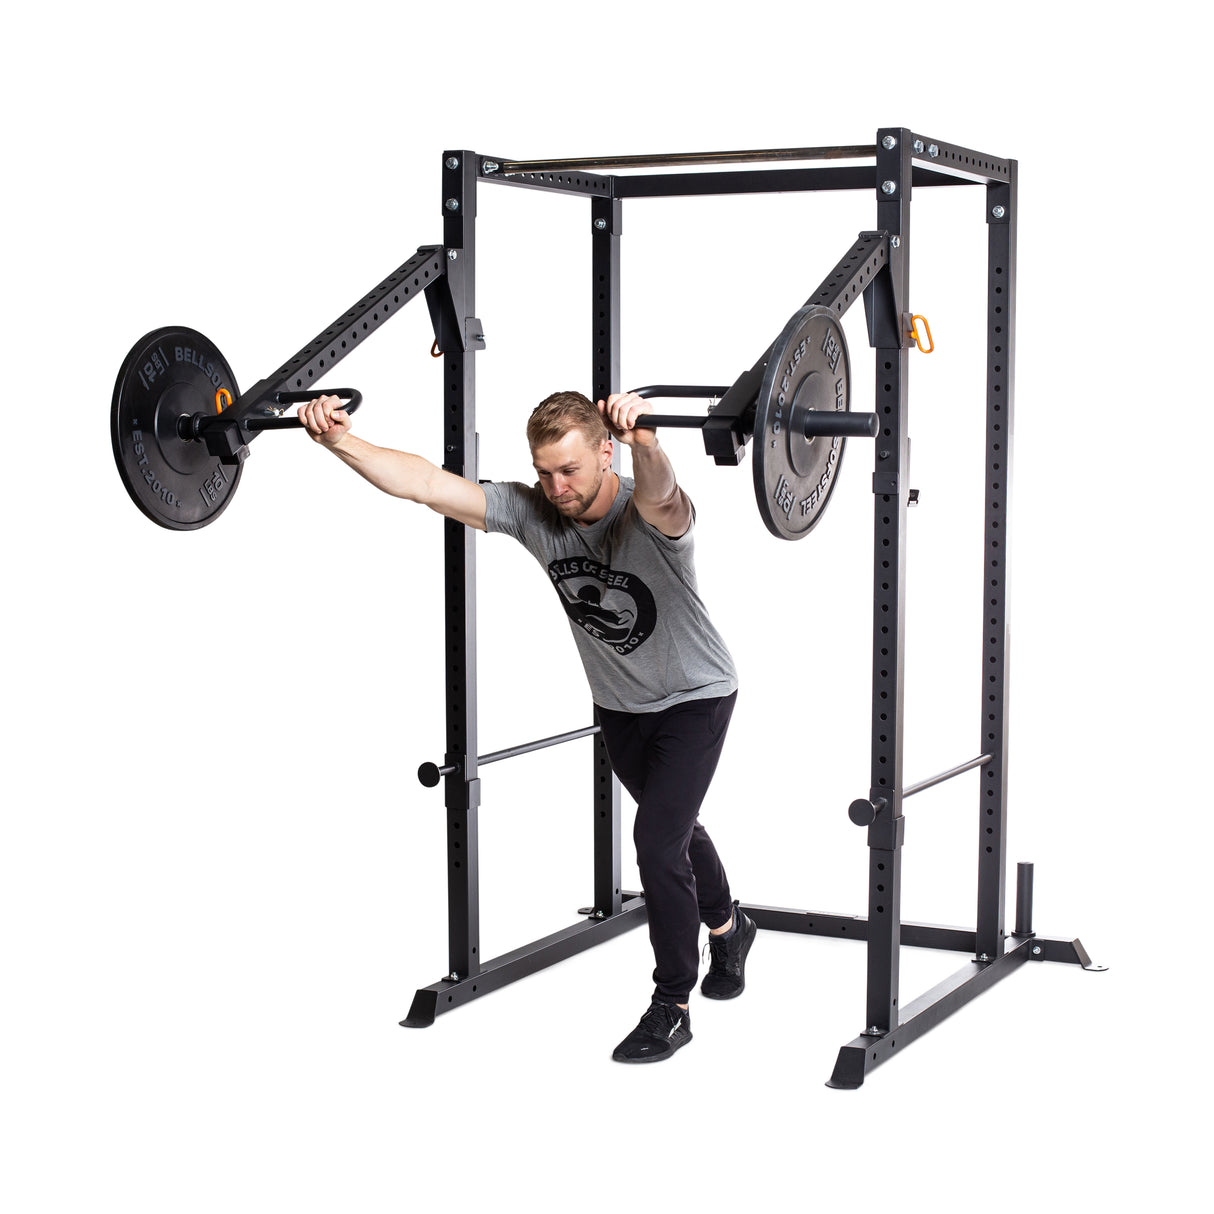 Male athlete using the Power Rack 4.1 residential model with lever arms